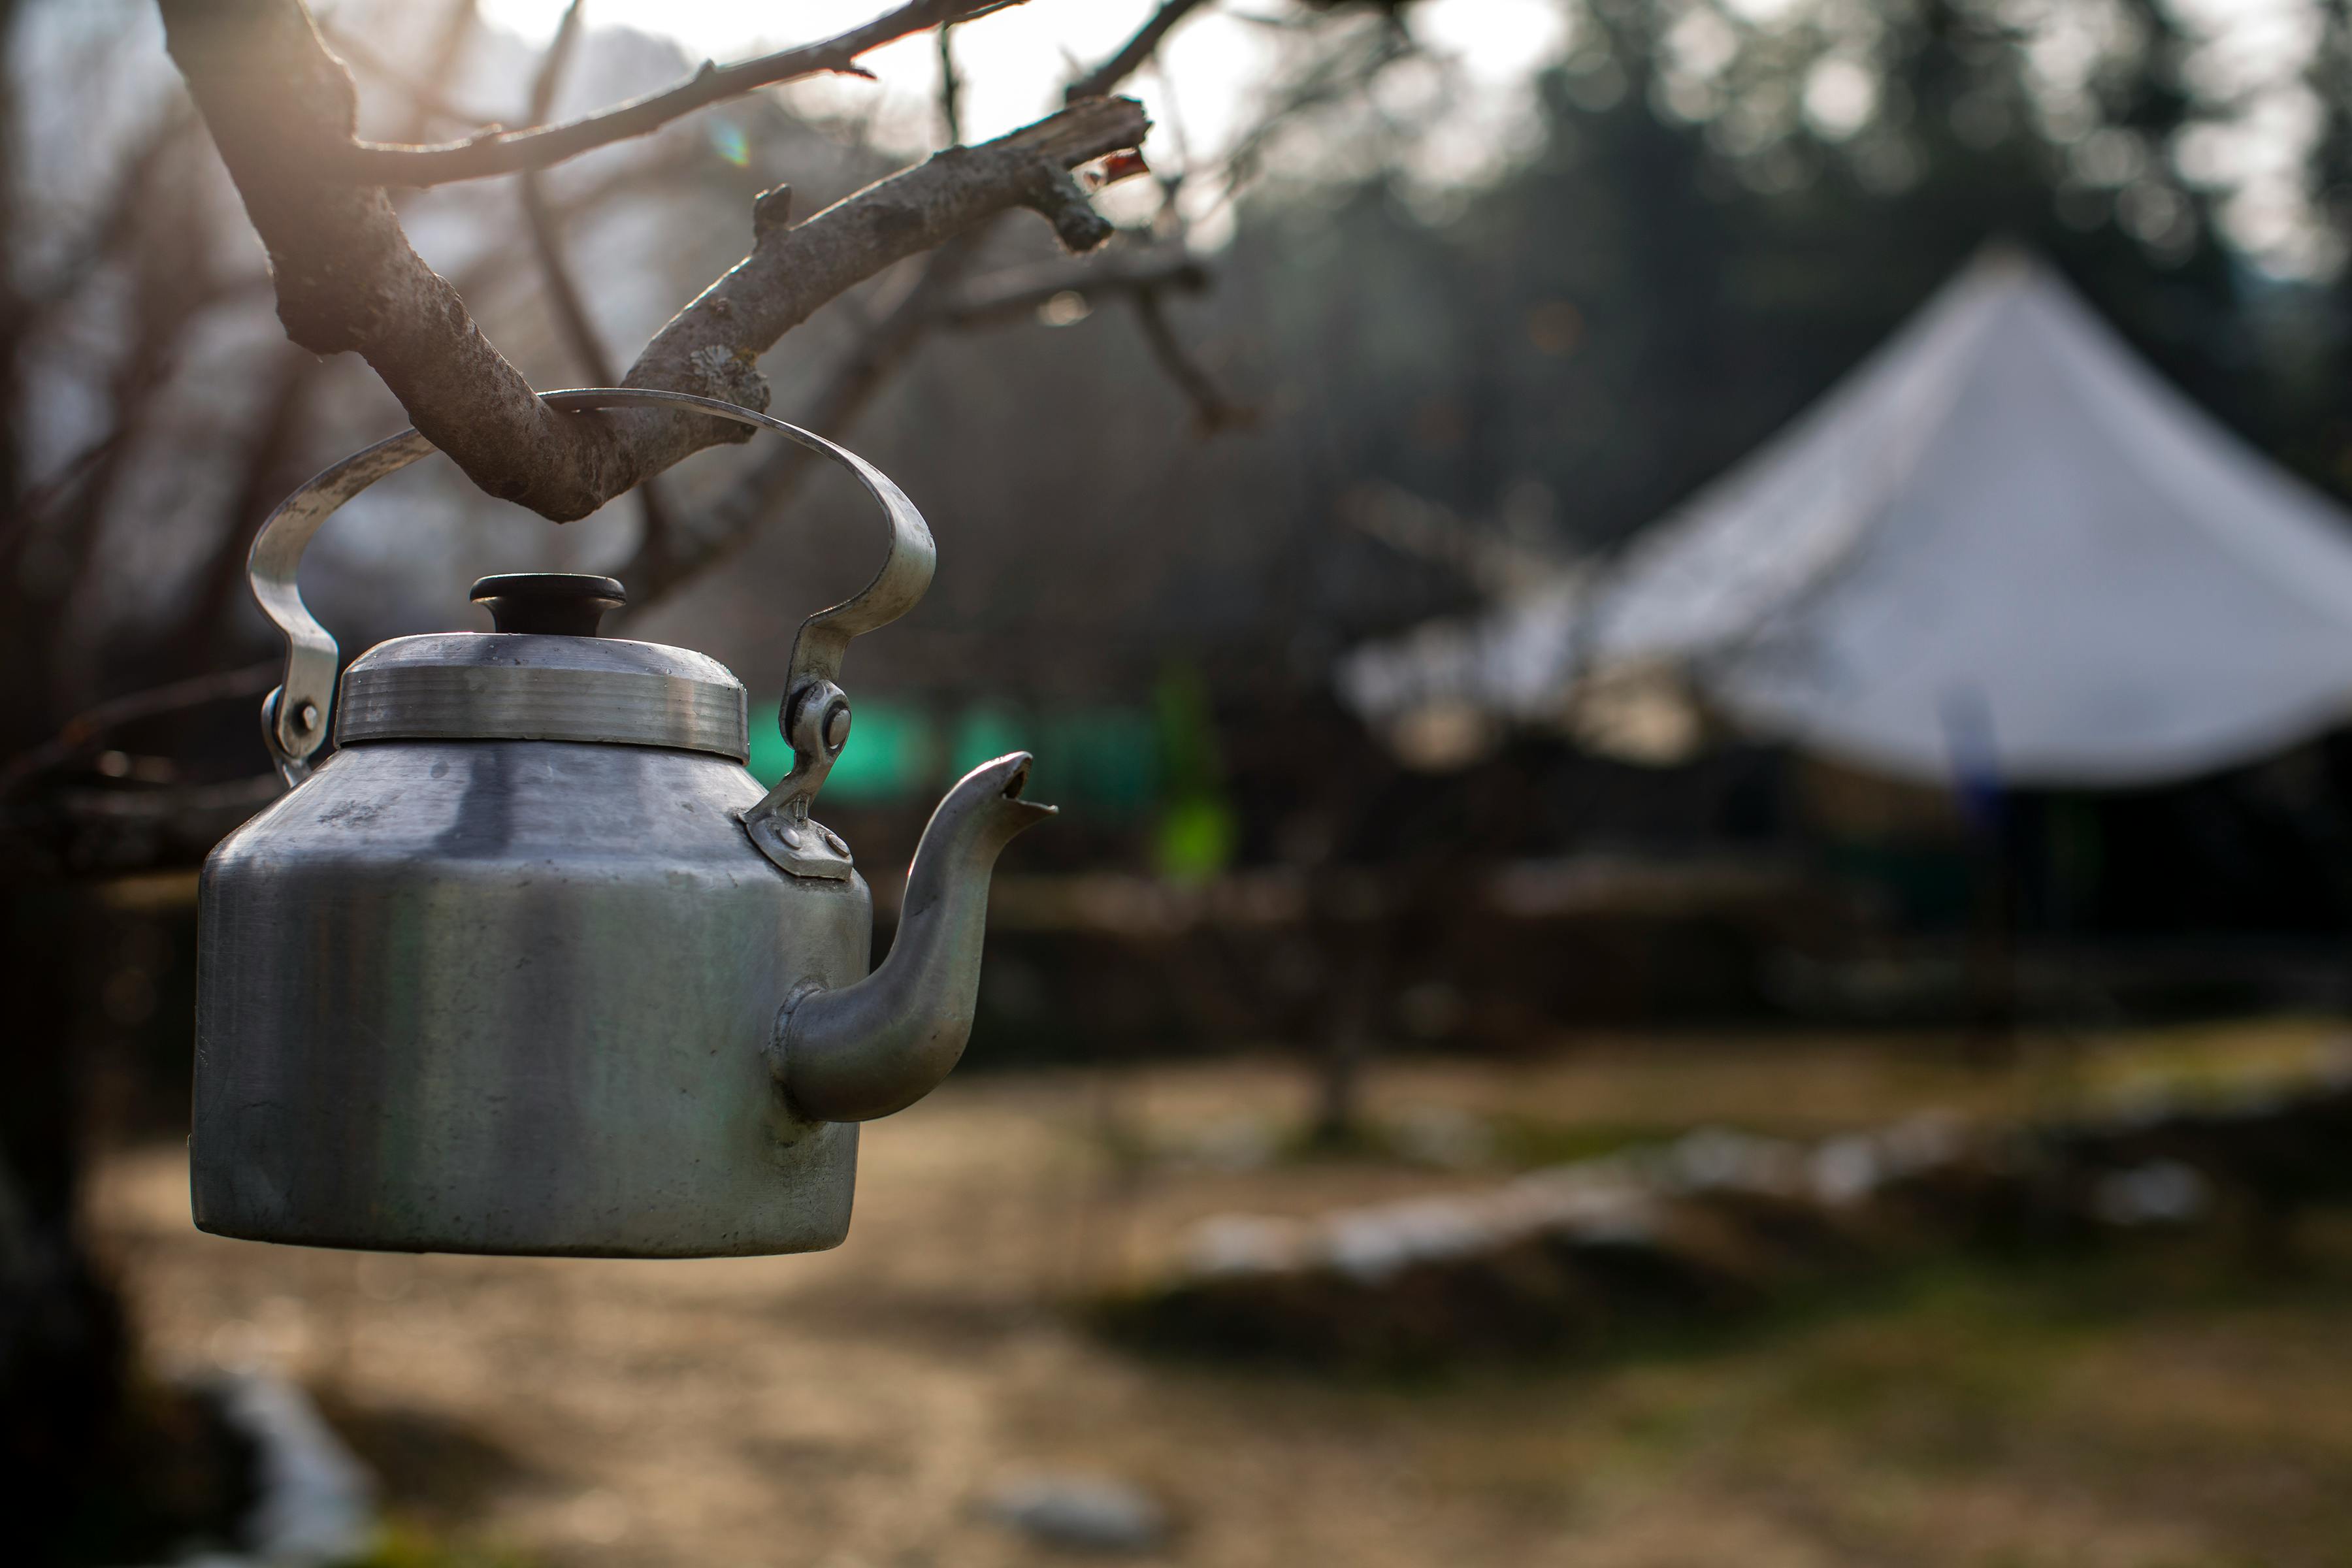 16+ Thousand Campfire Kettle Royalty-Free Images, Stock Photos